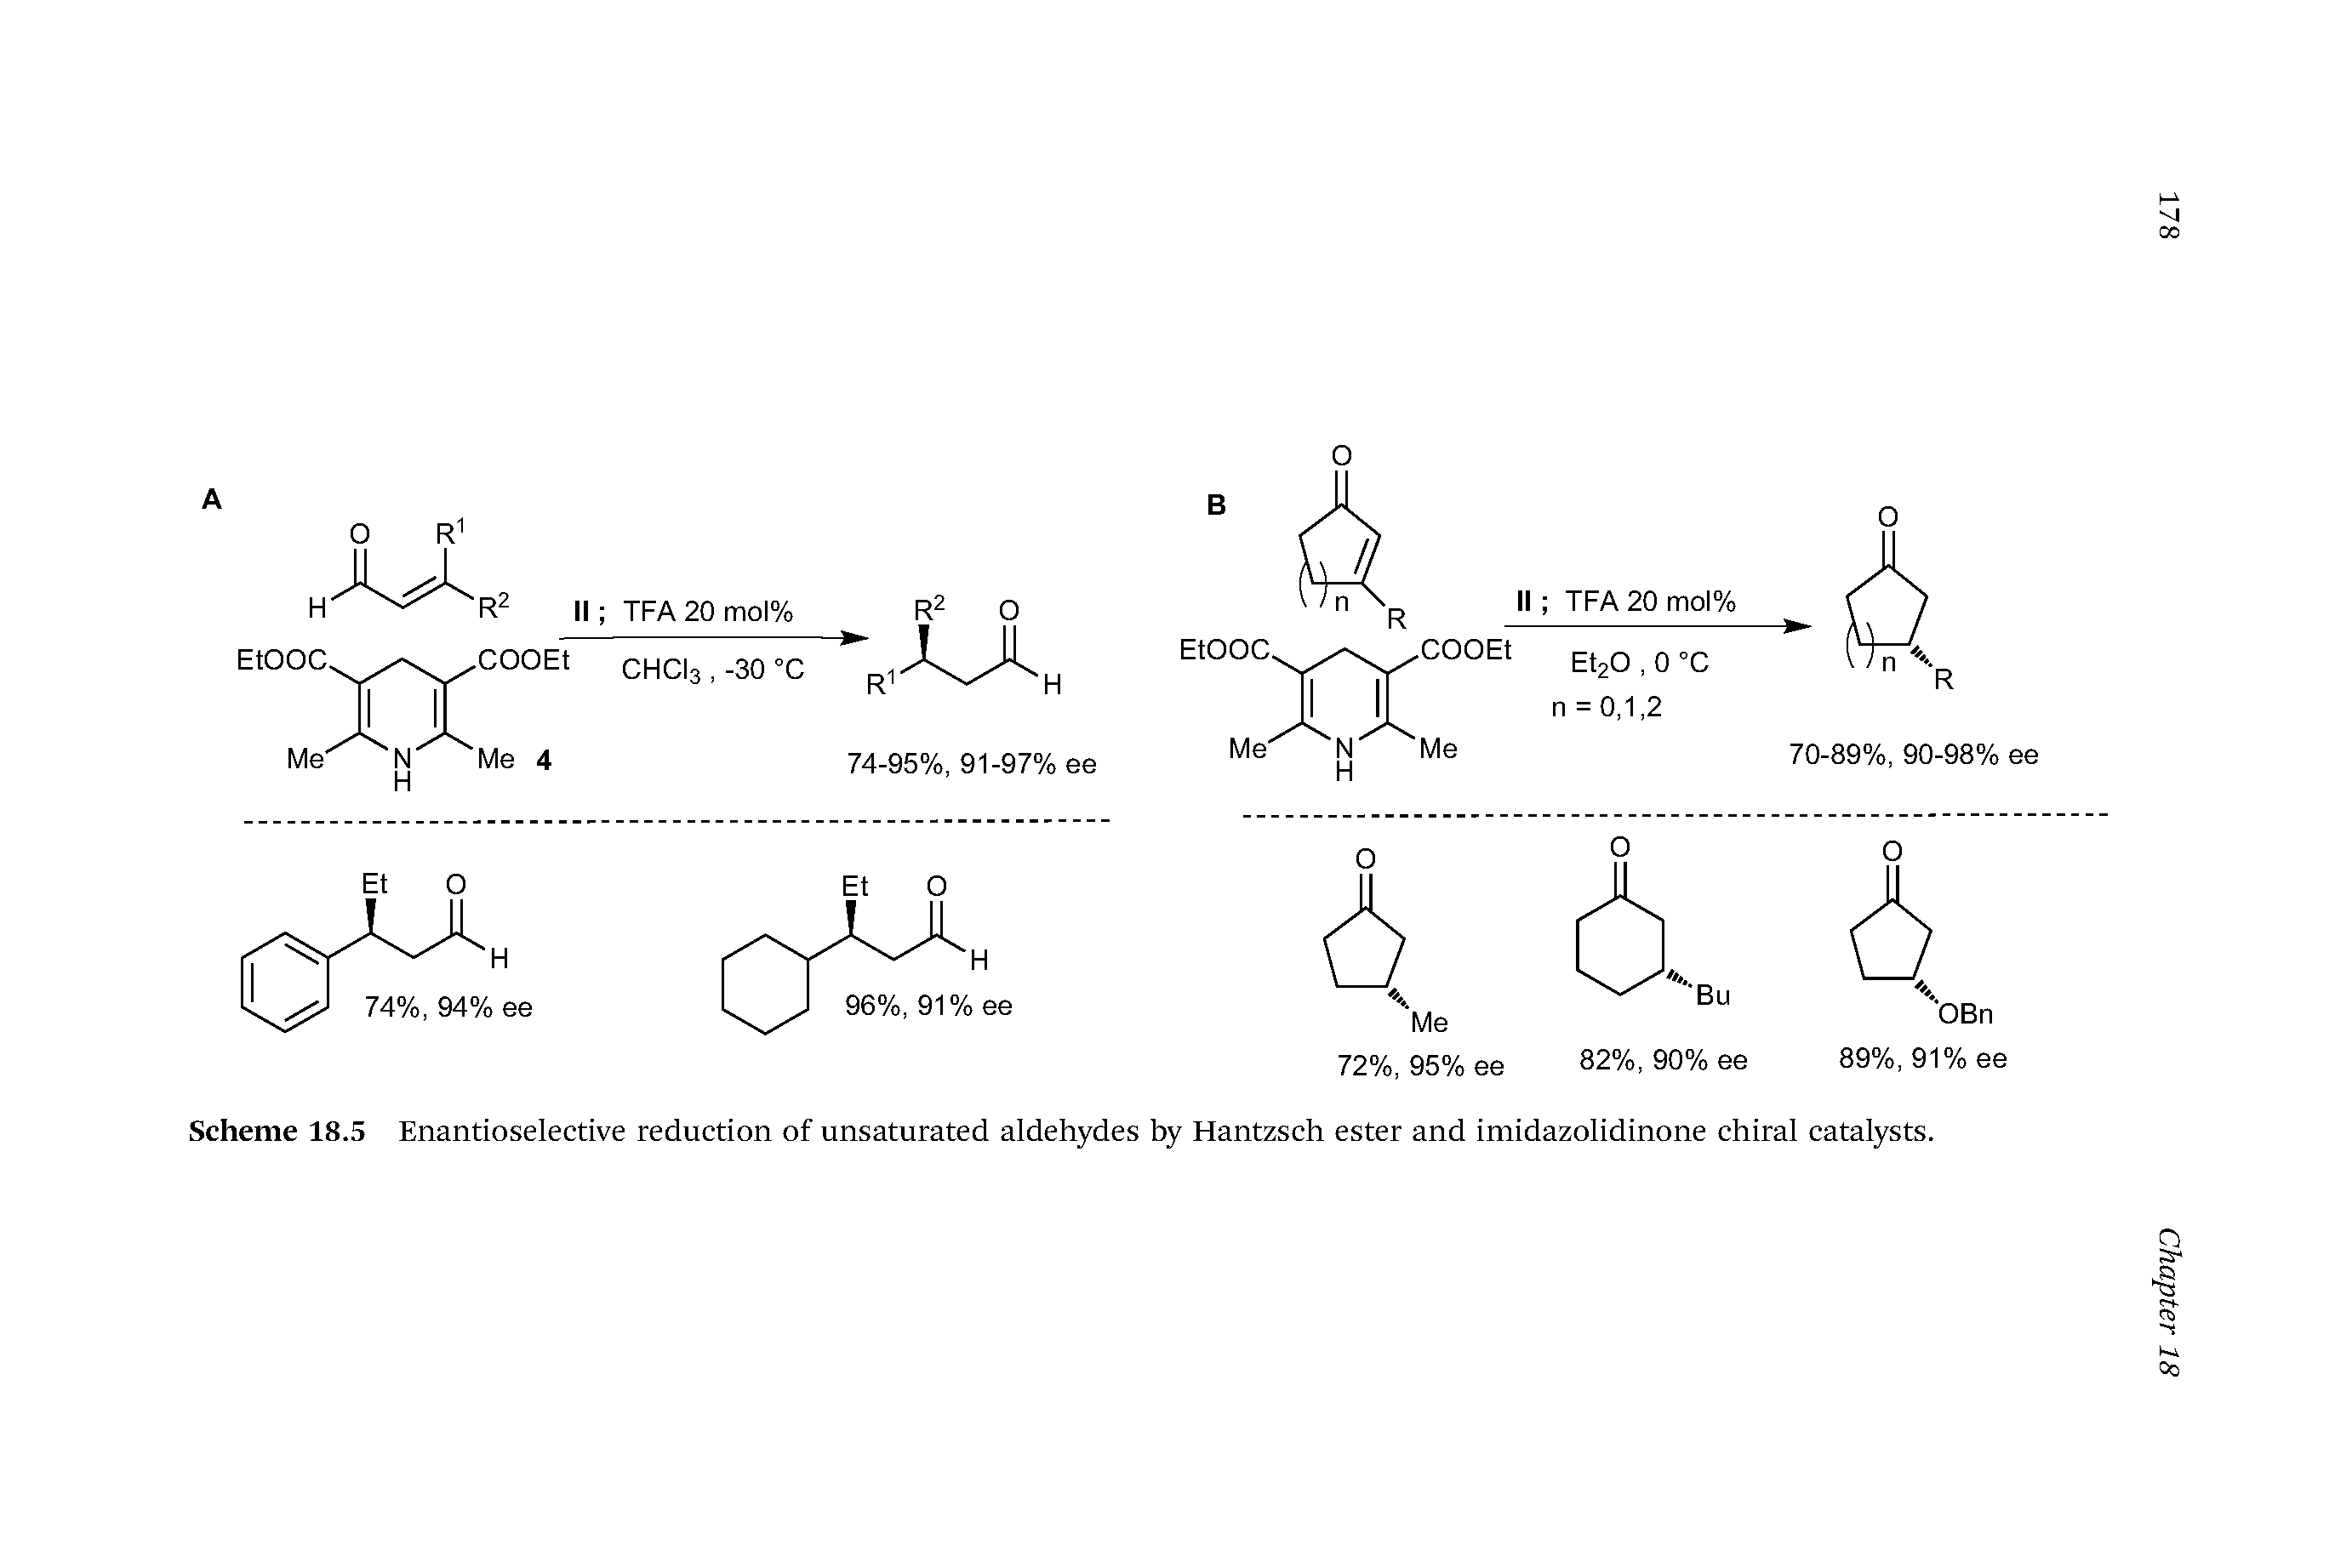 Scheme 18.5 Enantioselective reduction of unsaturated aldehydes by Hantzsch ester and imidazolidinone chiral catalysts.